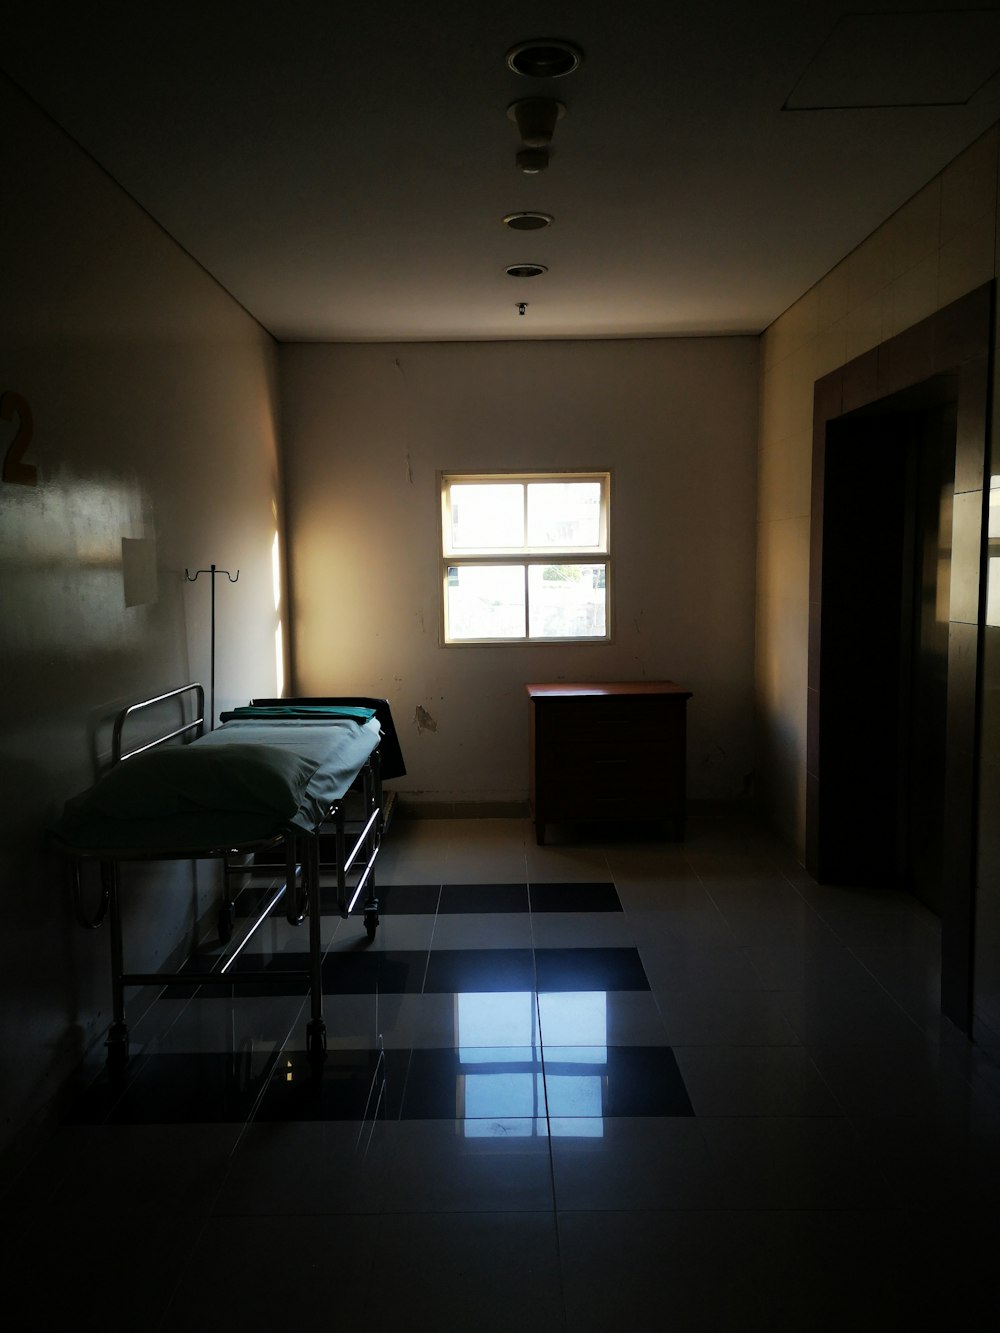 a dimly lit room with a hospital bed